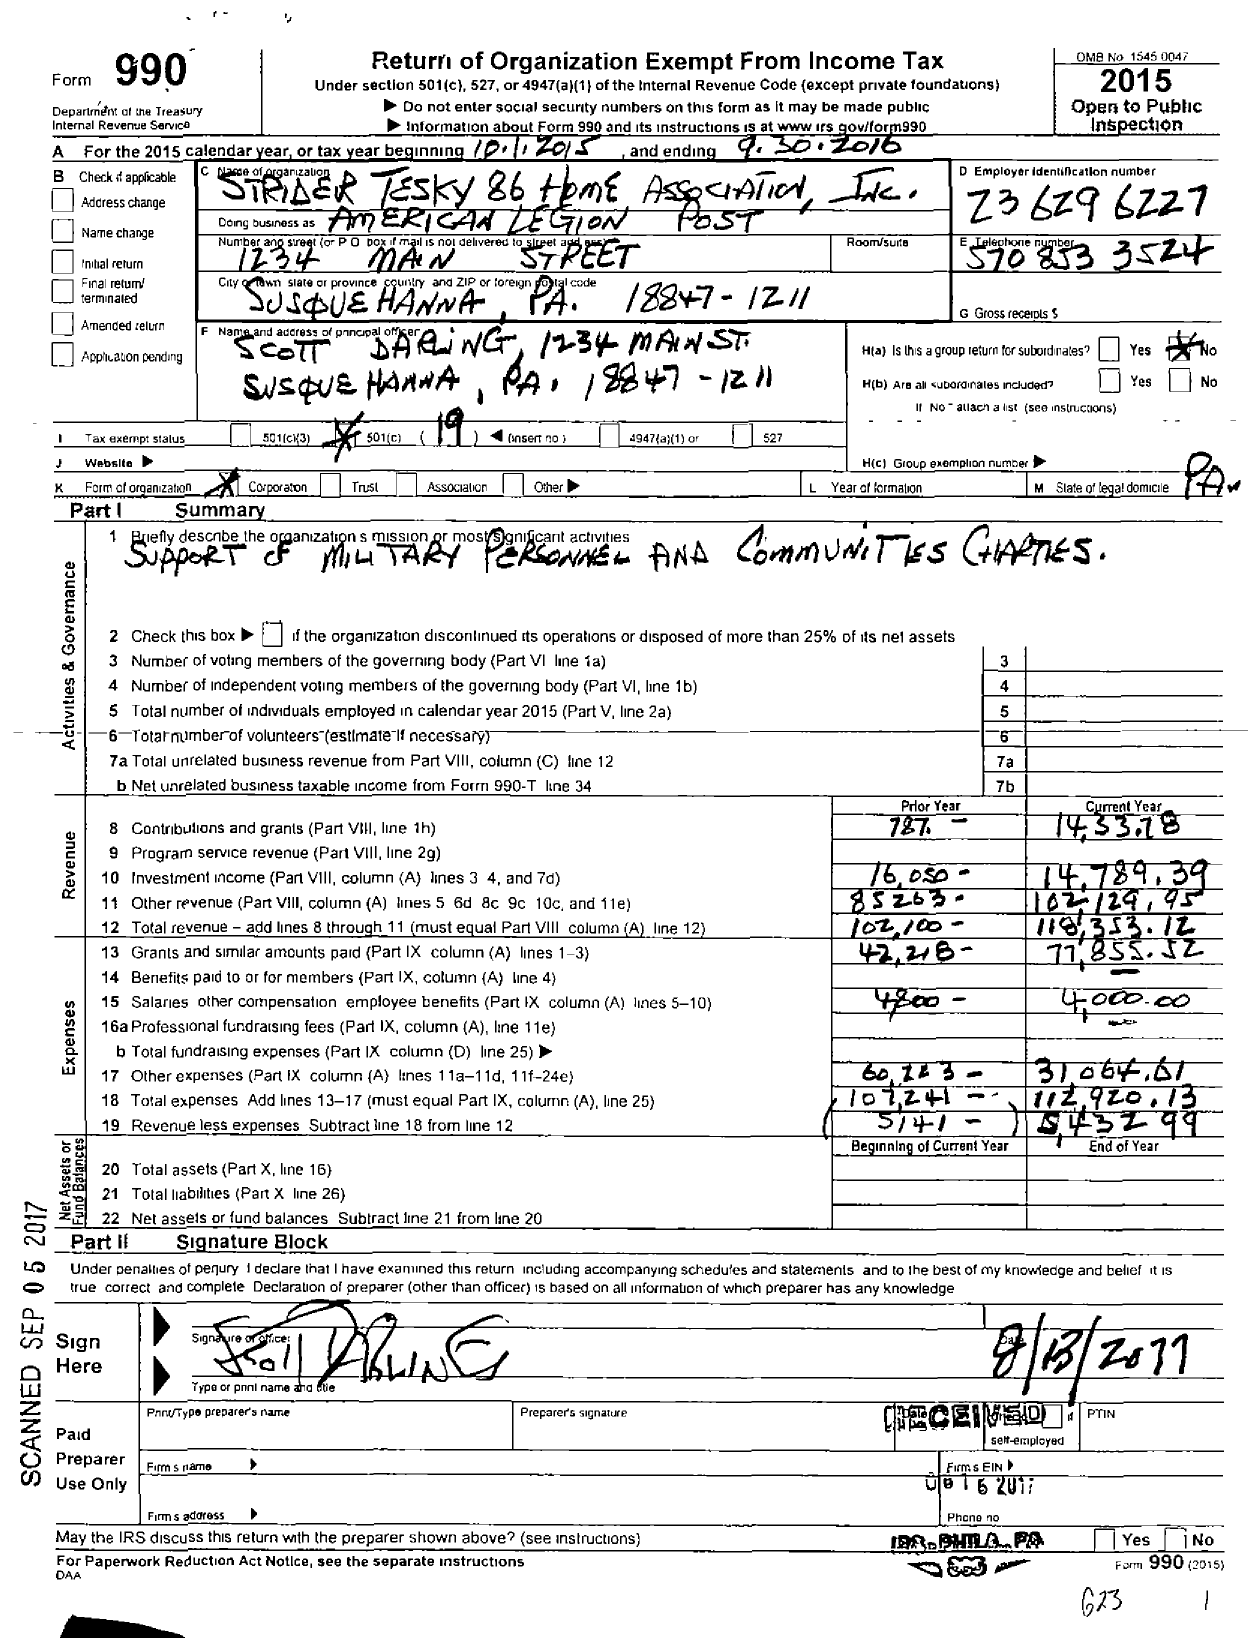 Image of first page of 2015 Form 990O for American Legion - American Legion 86 Strider-Tesky Post